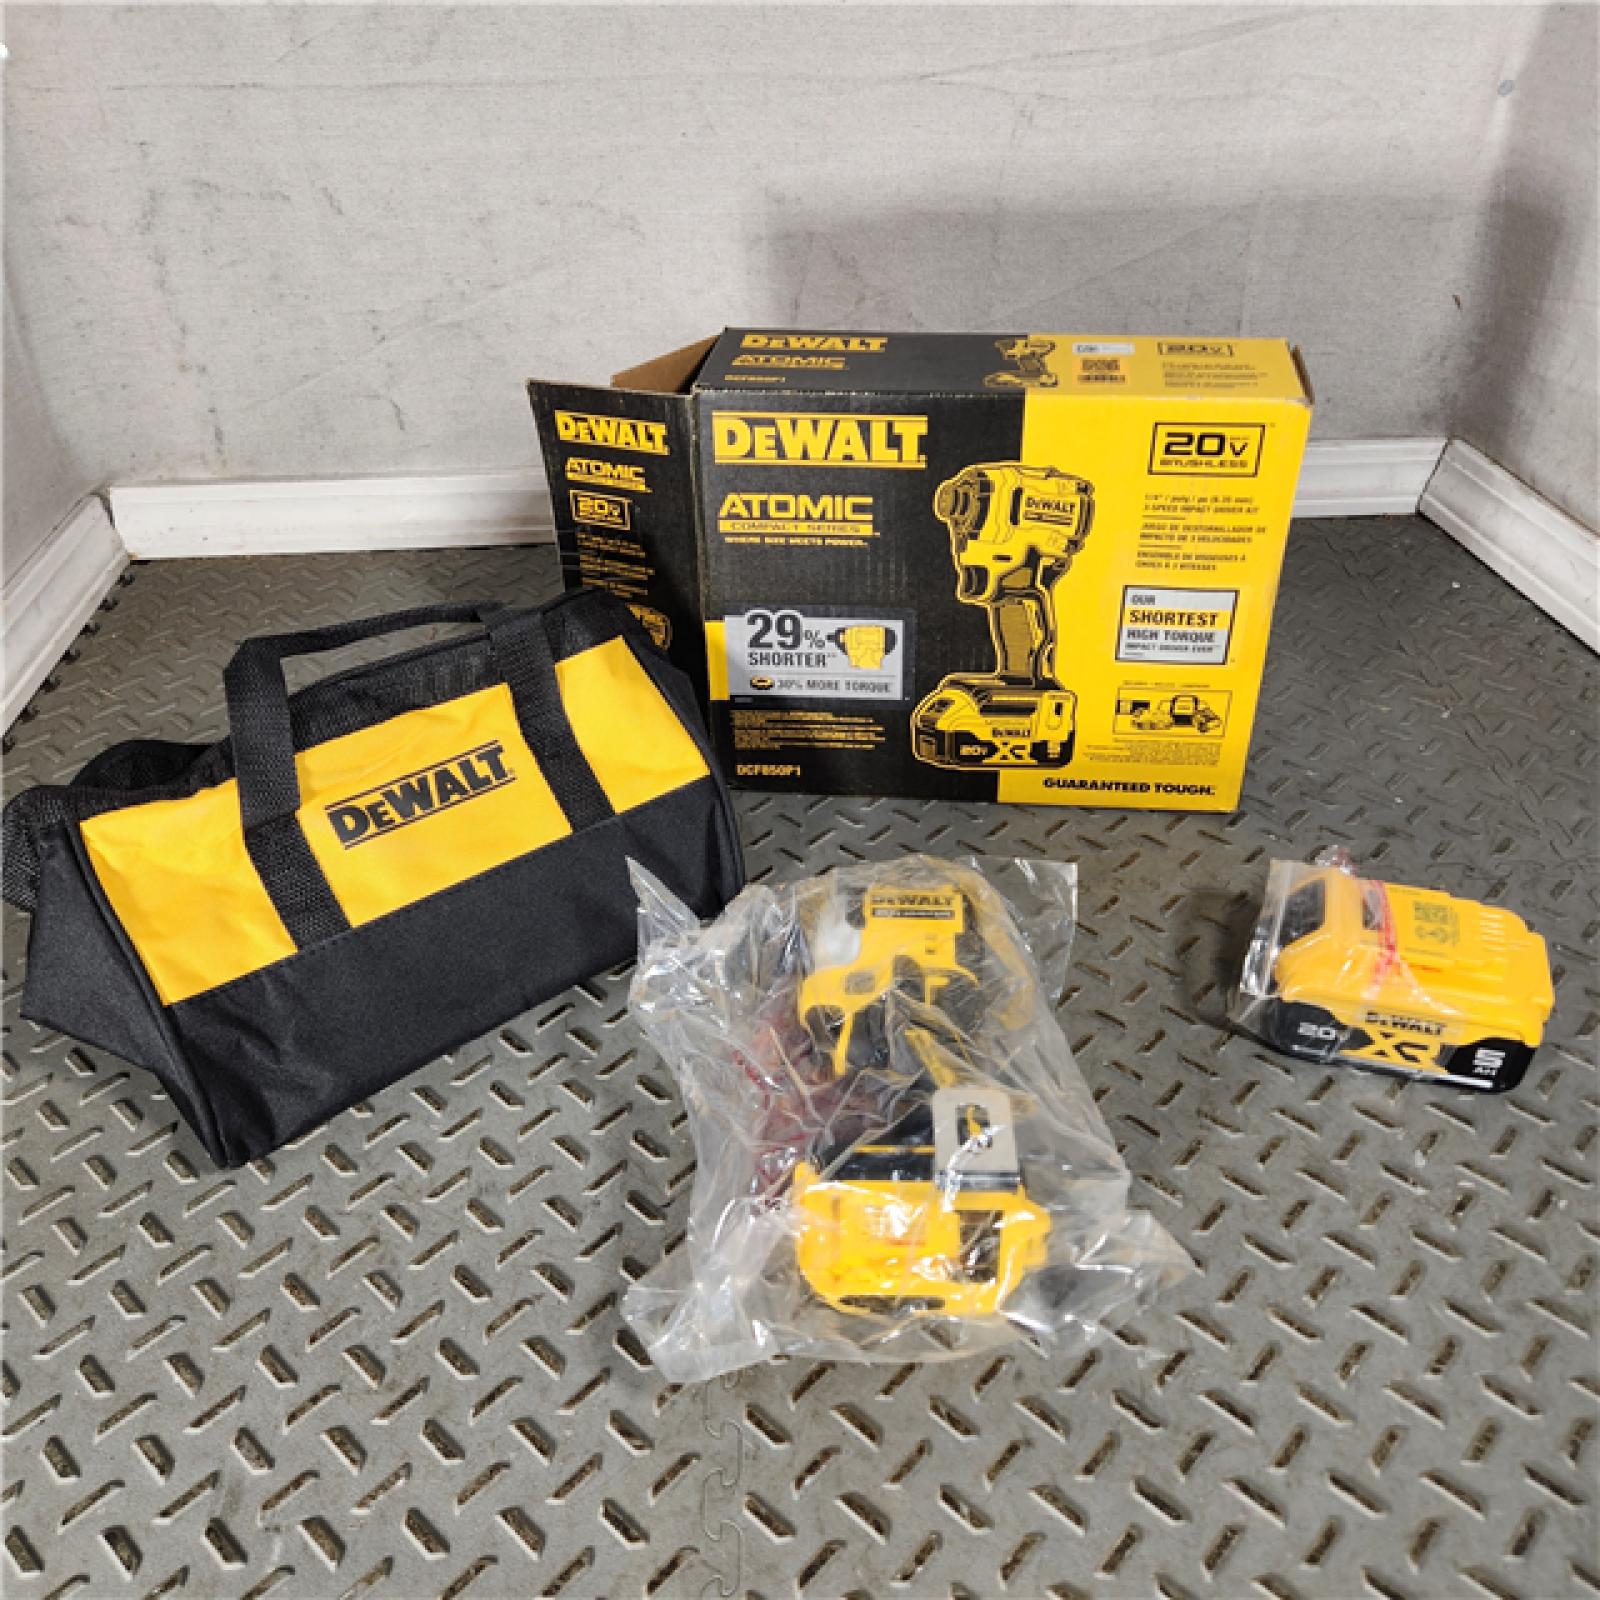 Houston Location - AS-IS DEWALT DCF850P1 ATOMIC 20V MAX Lithium-Ion Brushless Cordless 3-Speed 1/4 Impact Driver Kit 5.0Ah - Appears IN NEW Condition